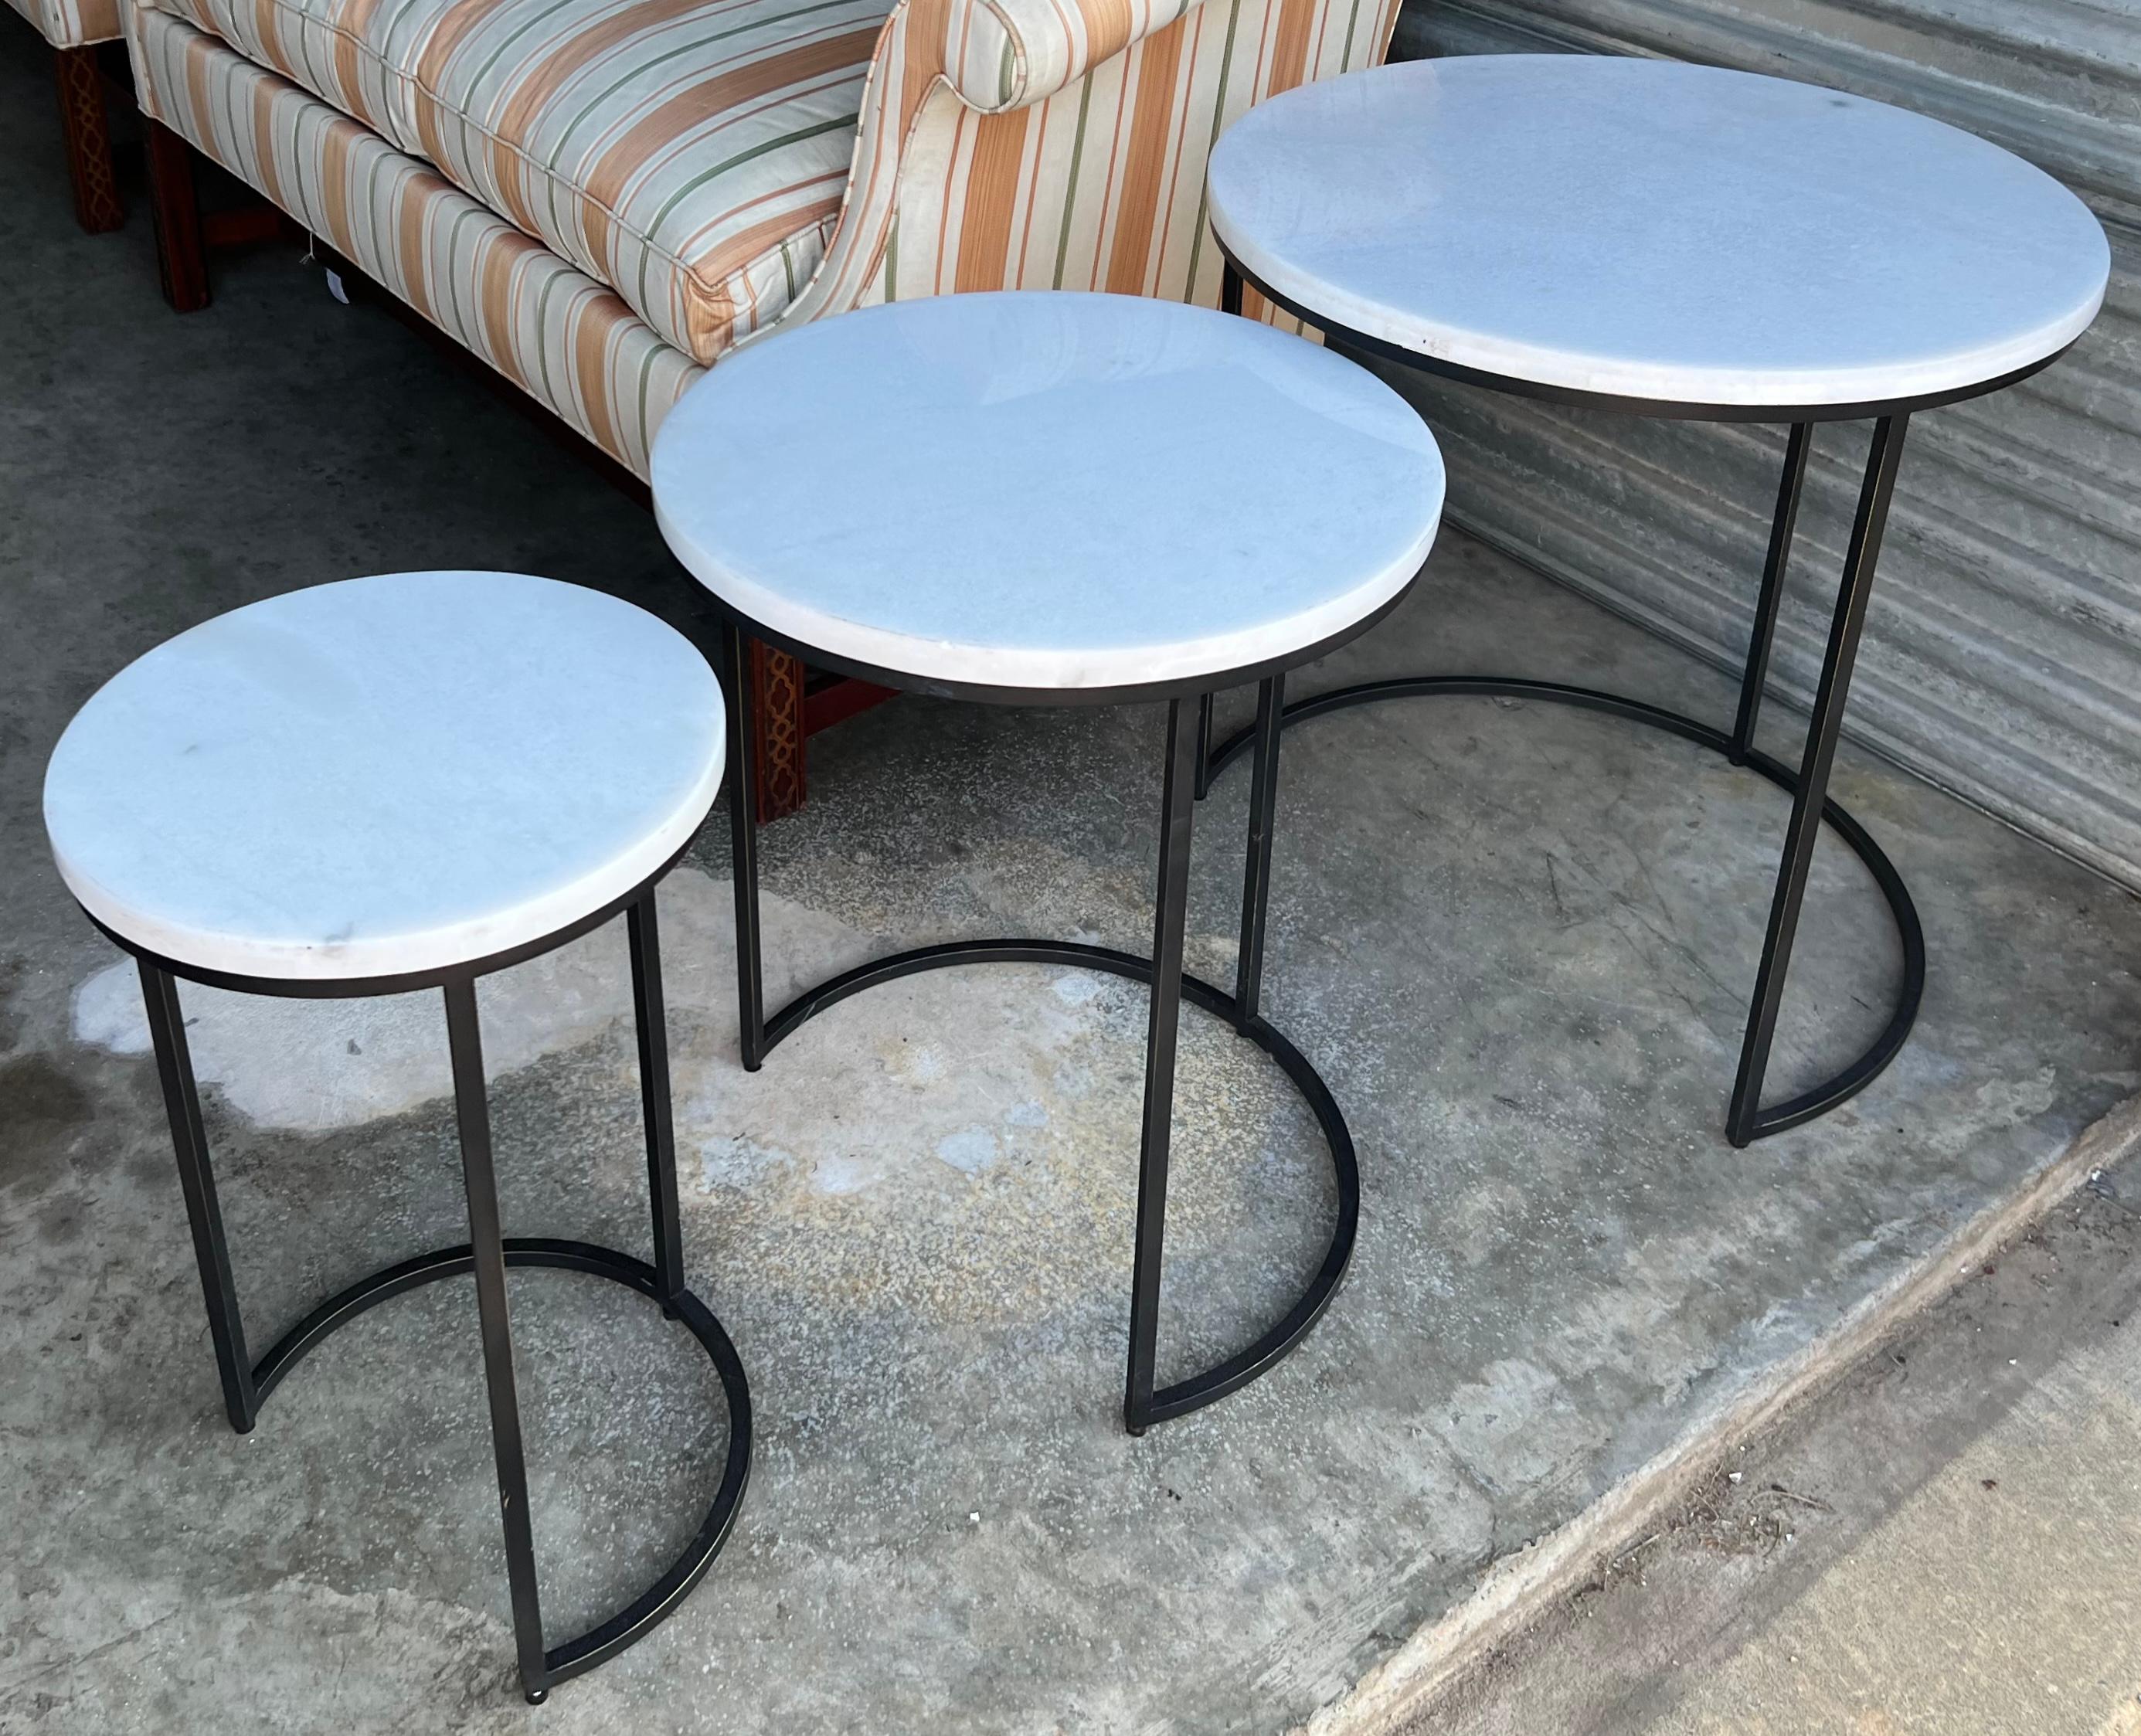 Late 20th-C. Modern Iron & Marble Nesting Tables by Mitchell Gold & Bob William For Sale 1